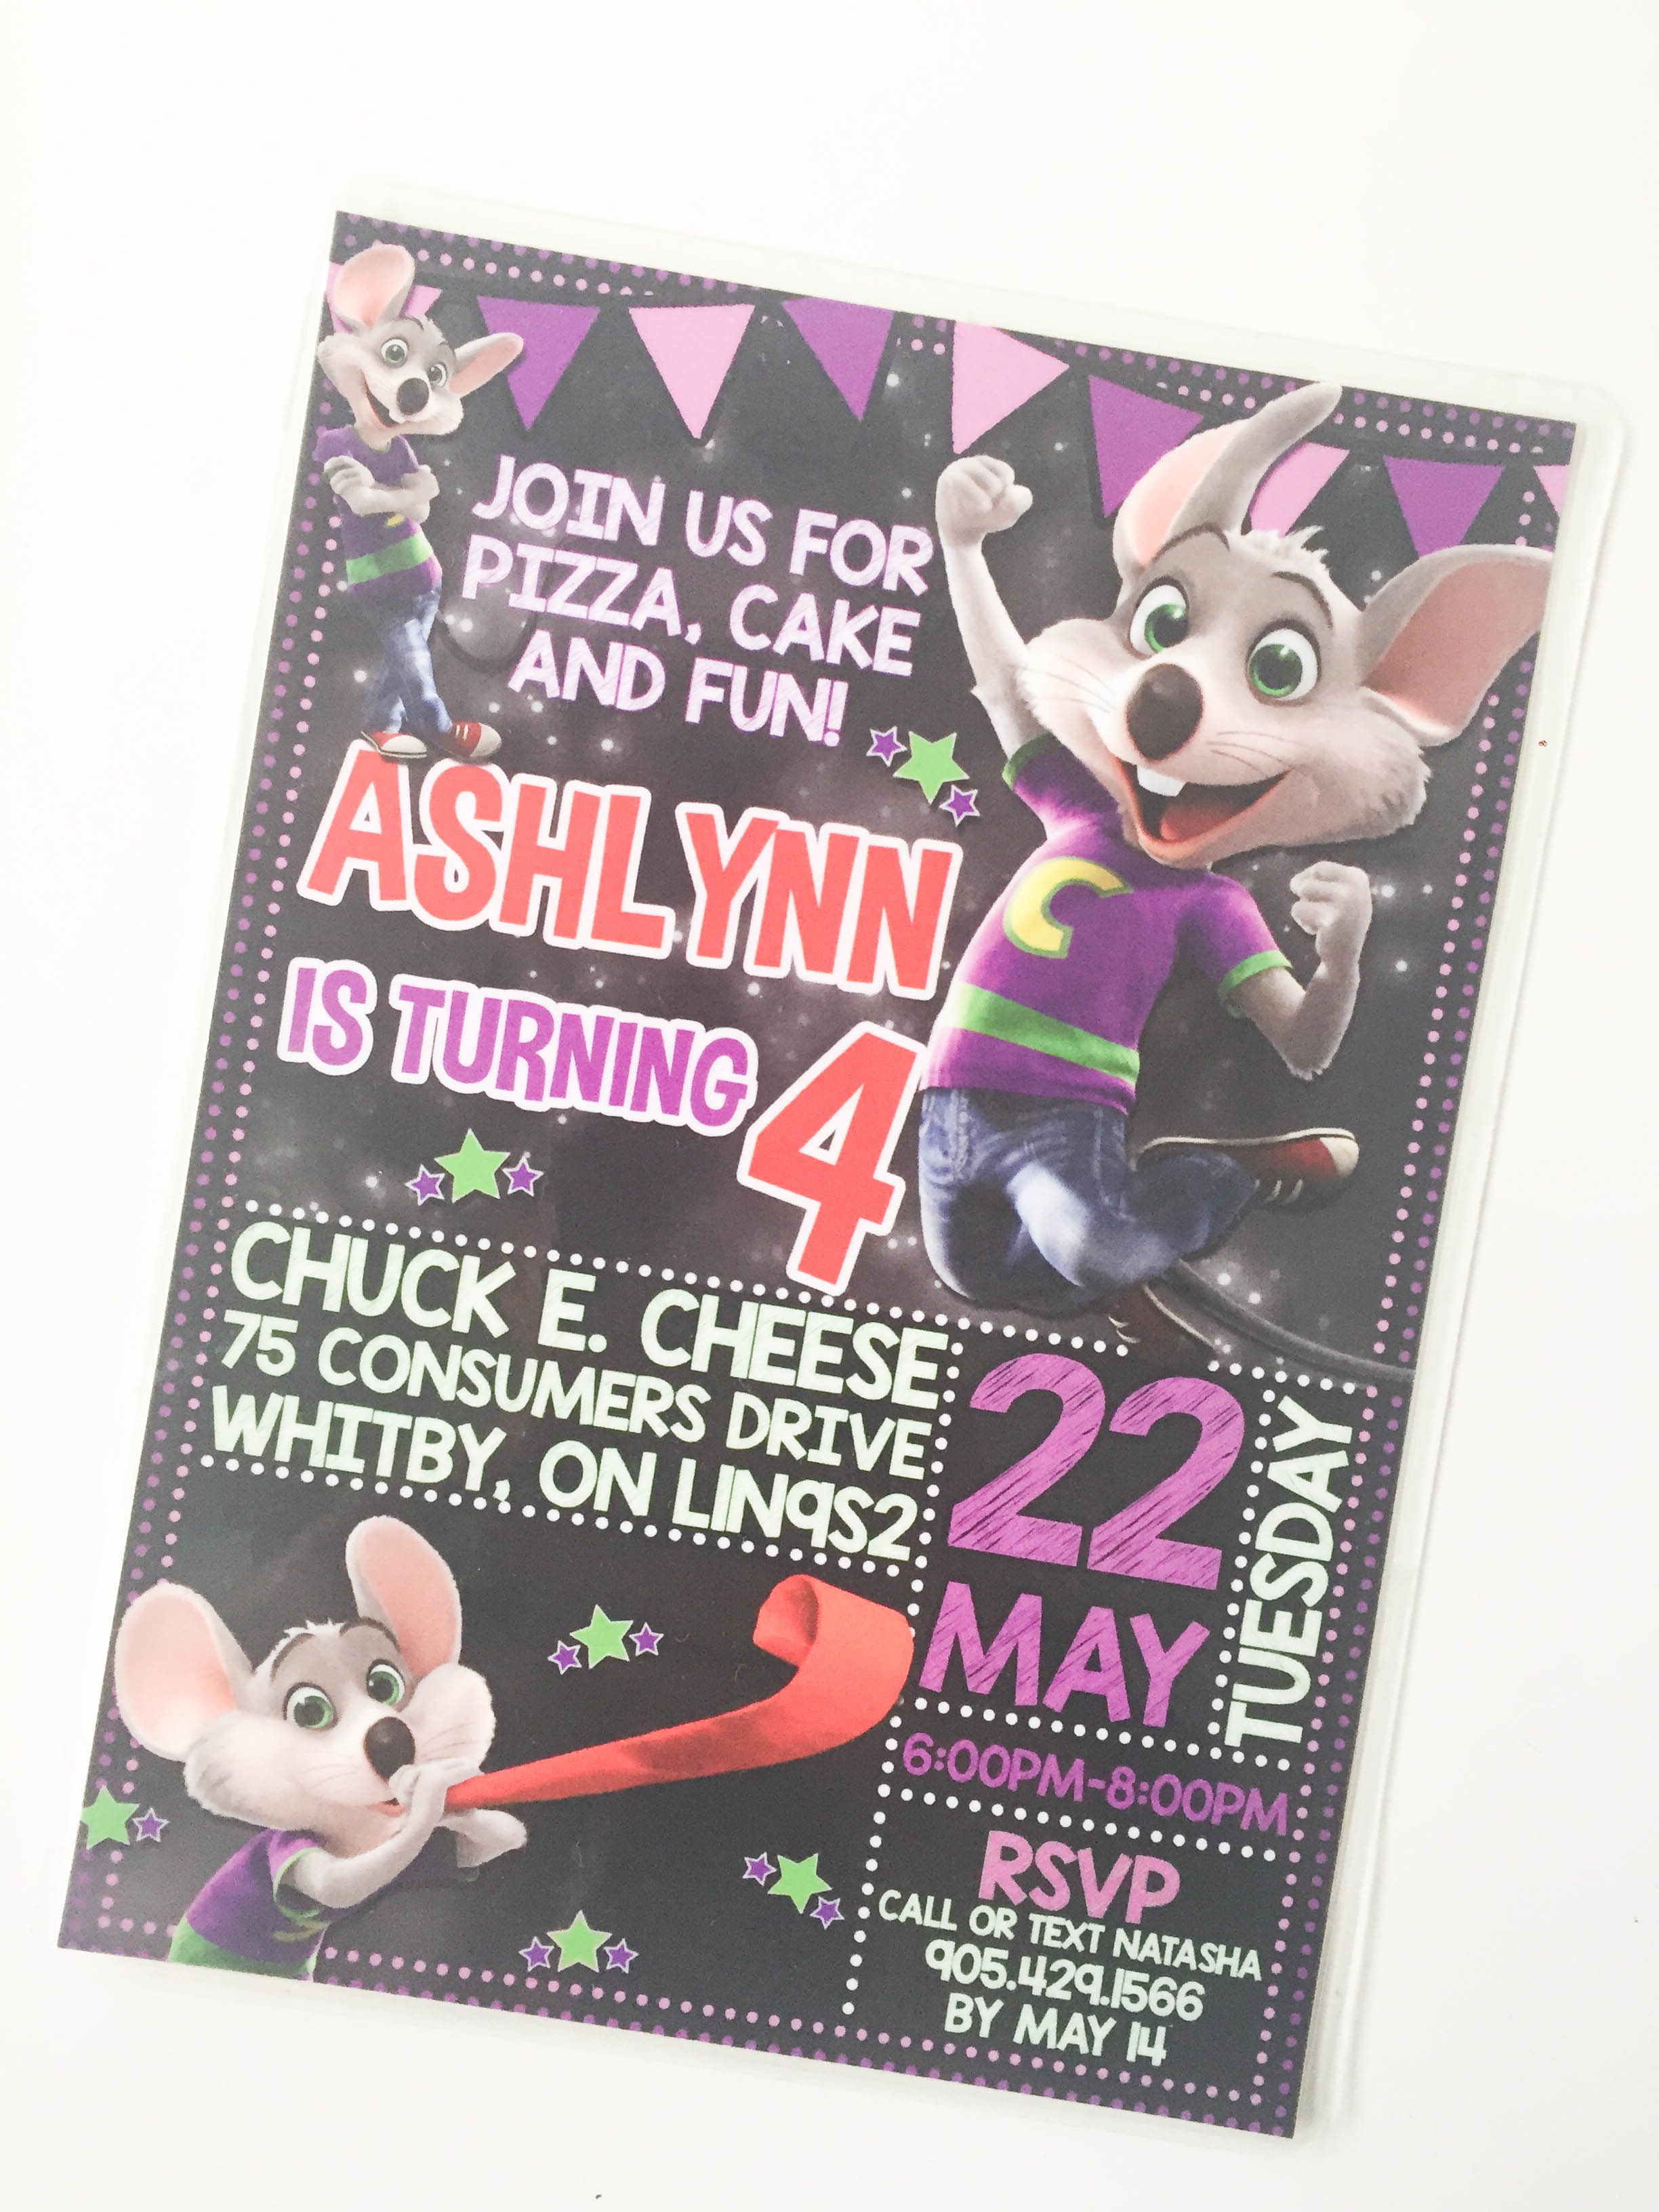 Chuck E. Cheese invite on Livin' Life with Style 